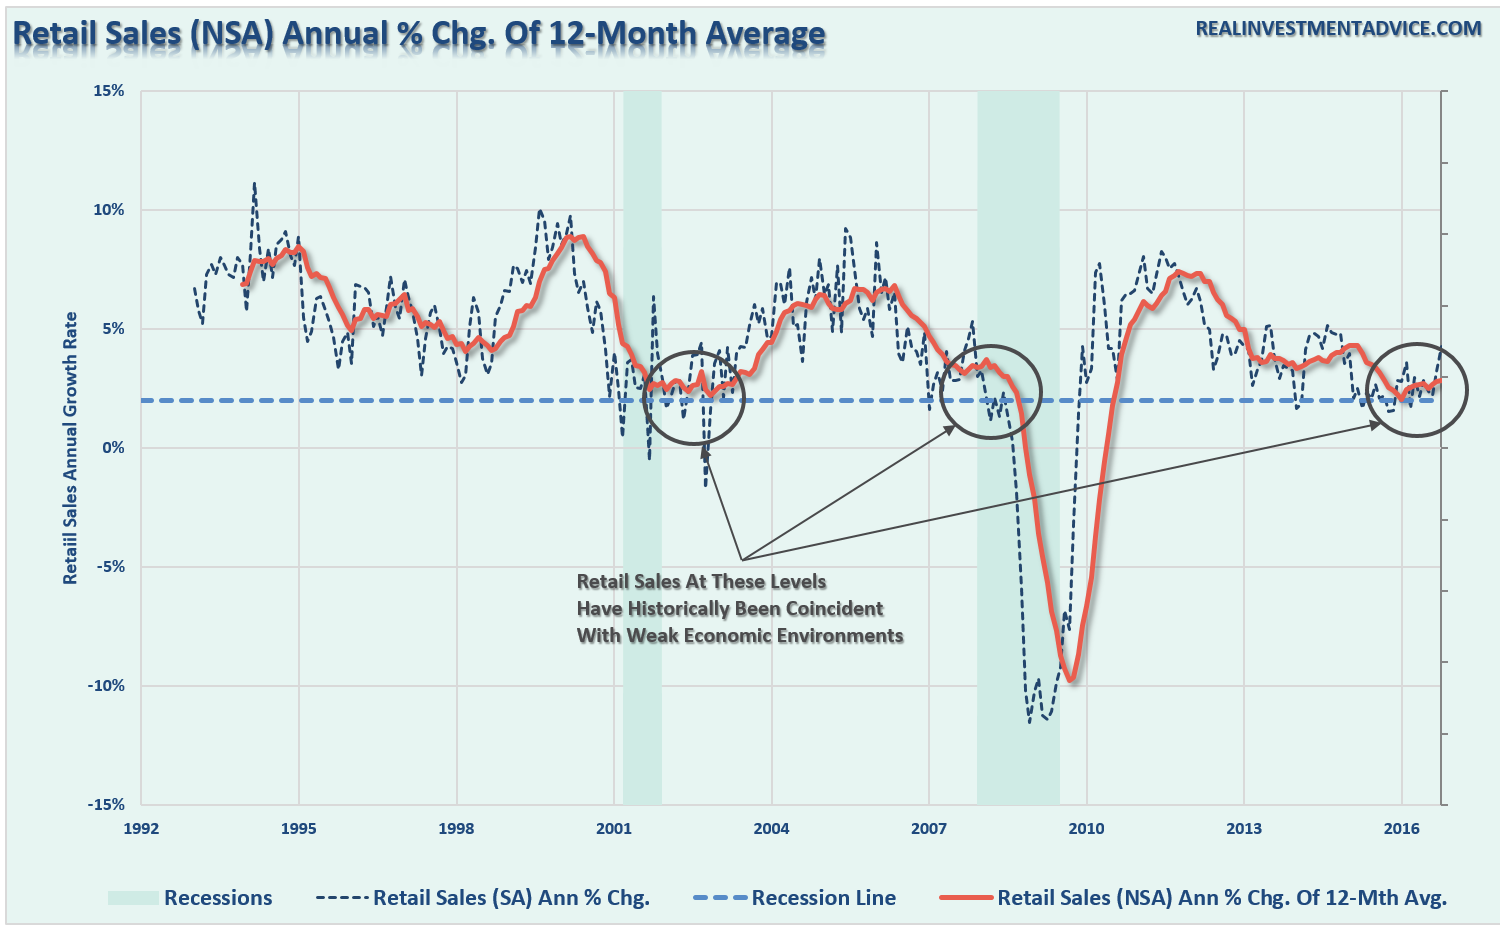 Retail Sales (NSA) Annual % Change of 12-Month Average